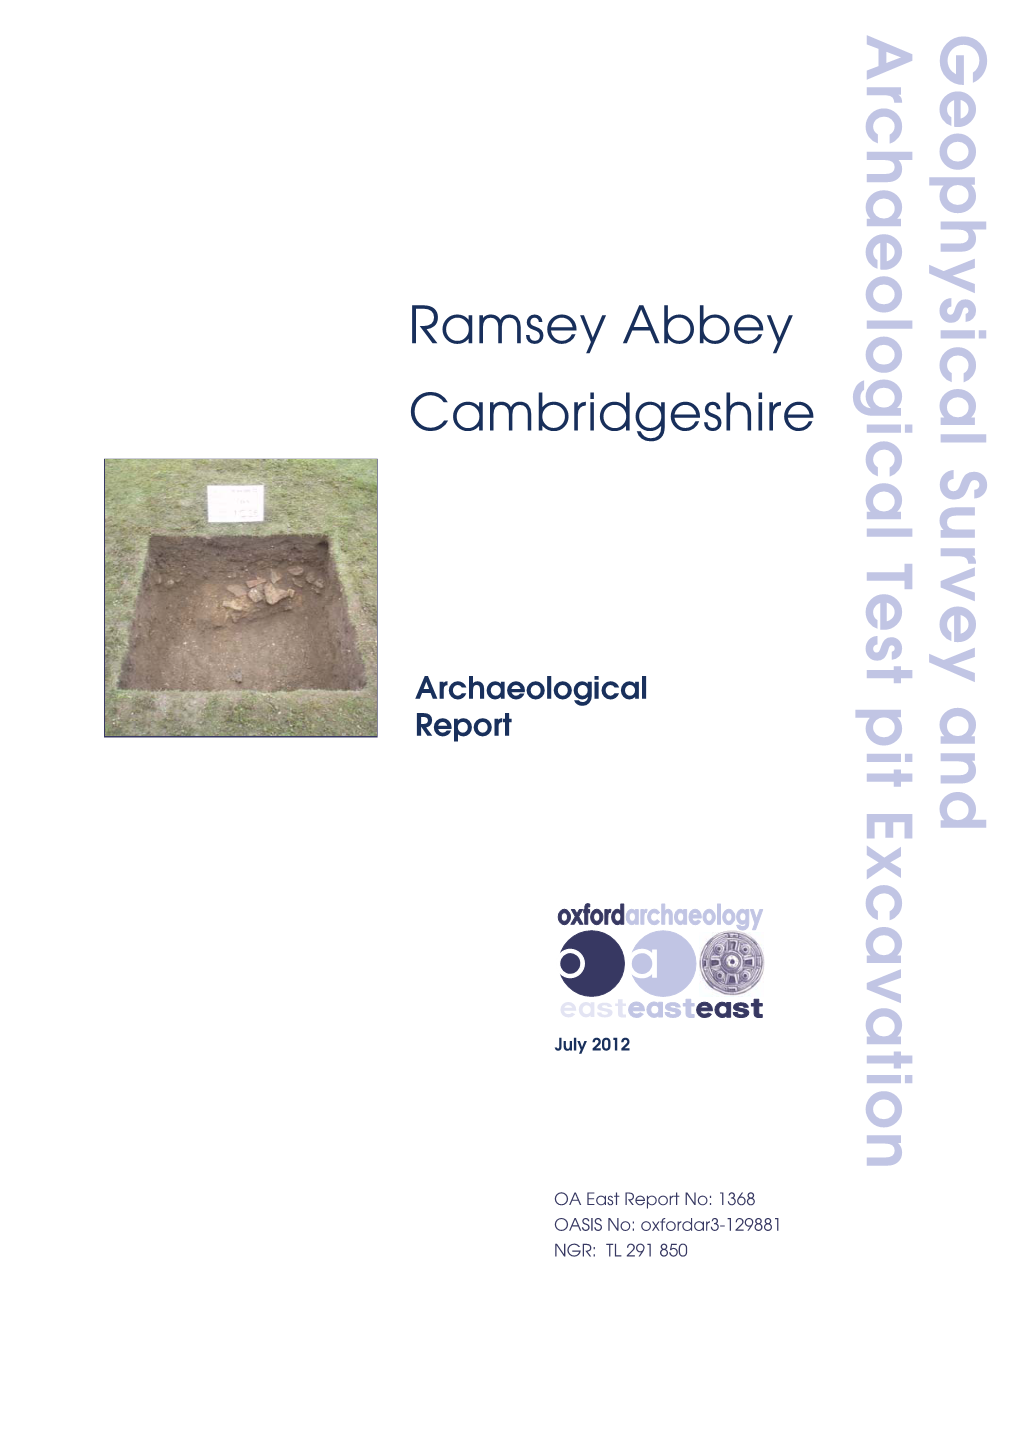 Geophysical Survey and Archaeological Test Pit Excavation